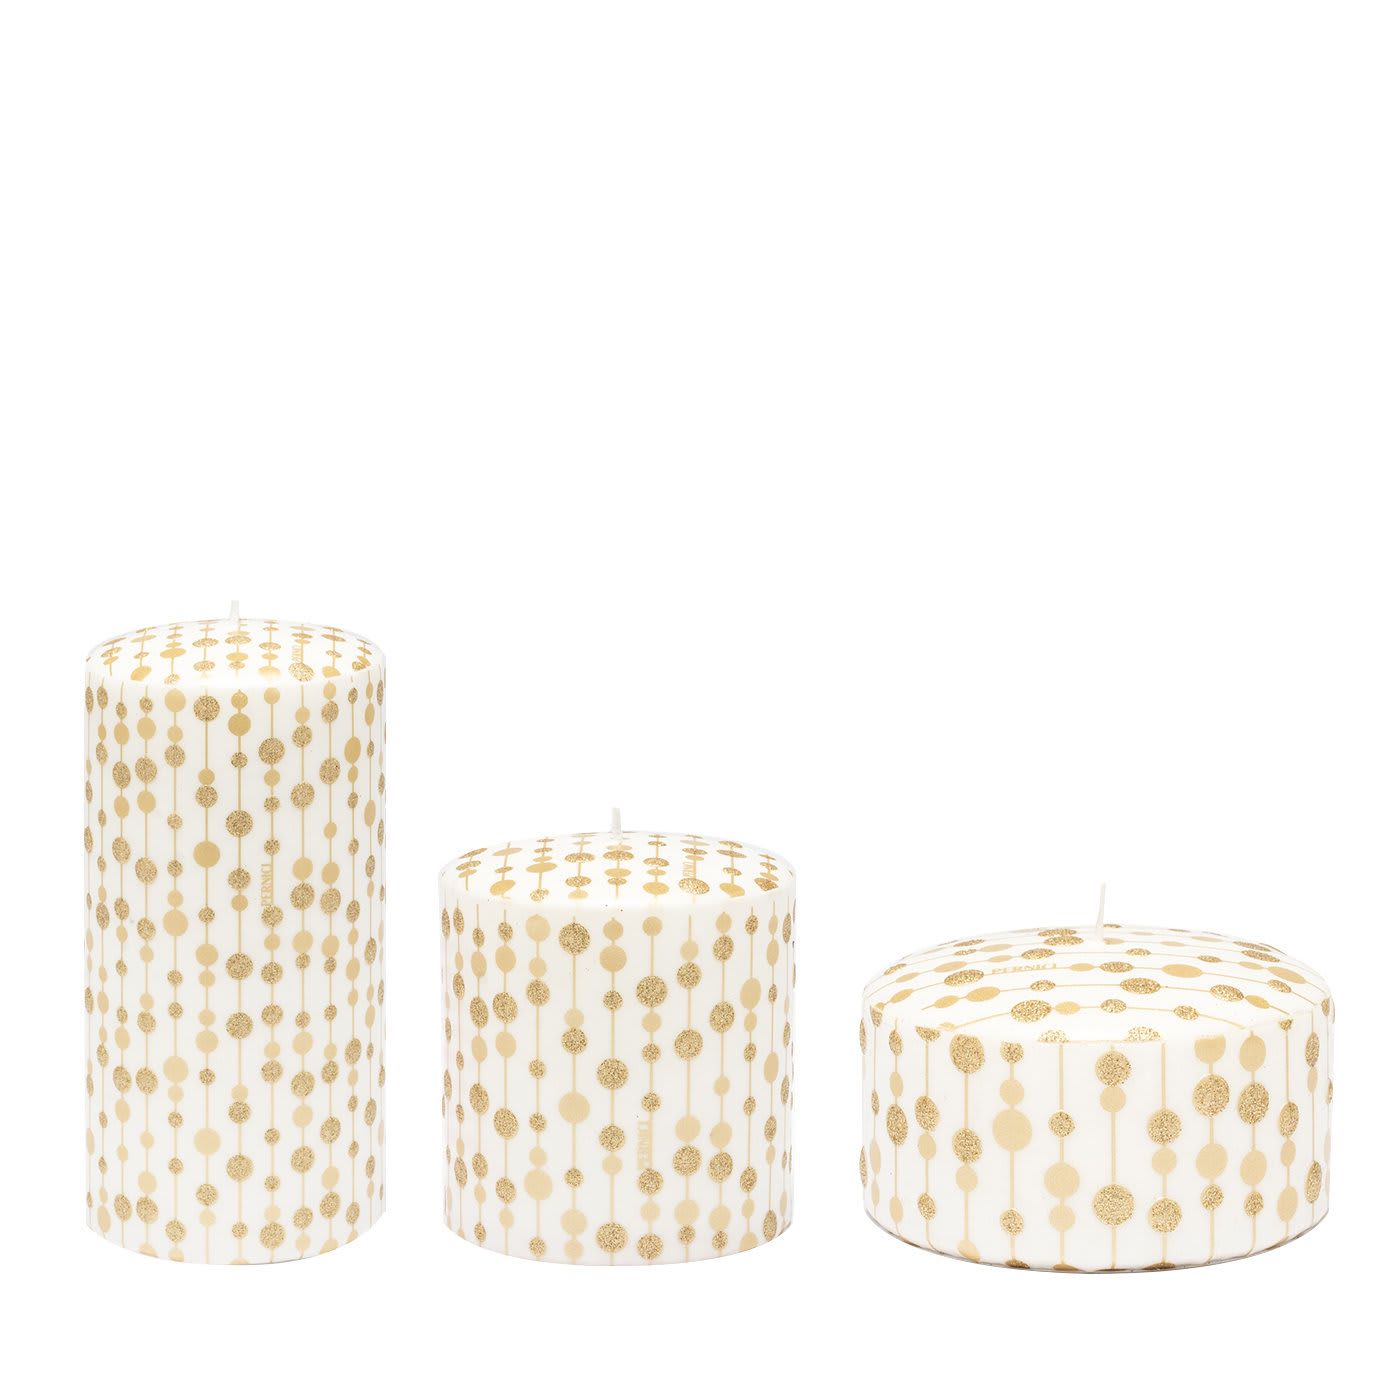 Pois Set of 3 Gold and Beige Candles - Cereria Pernici 1892